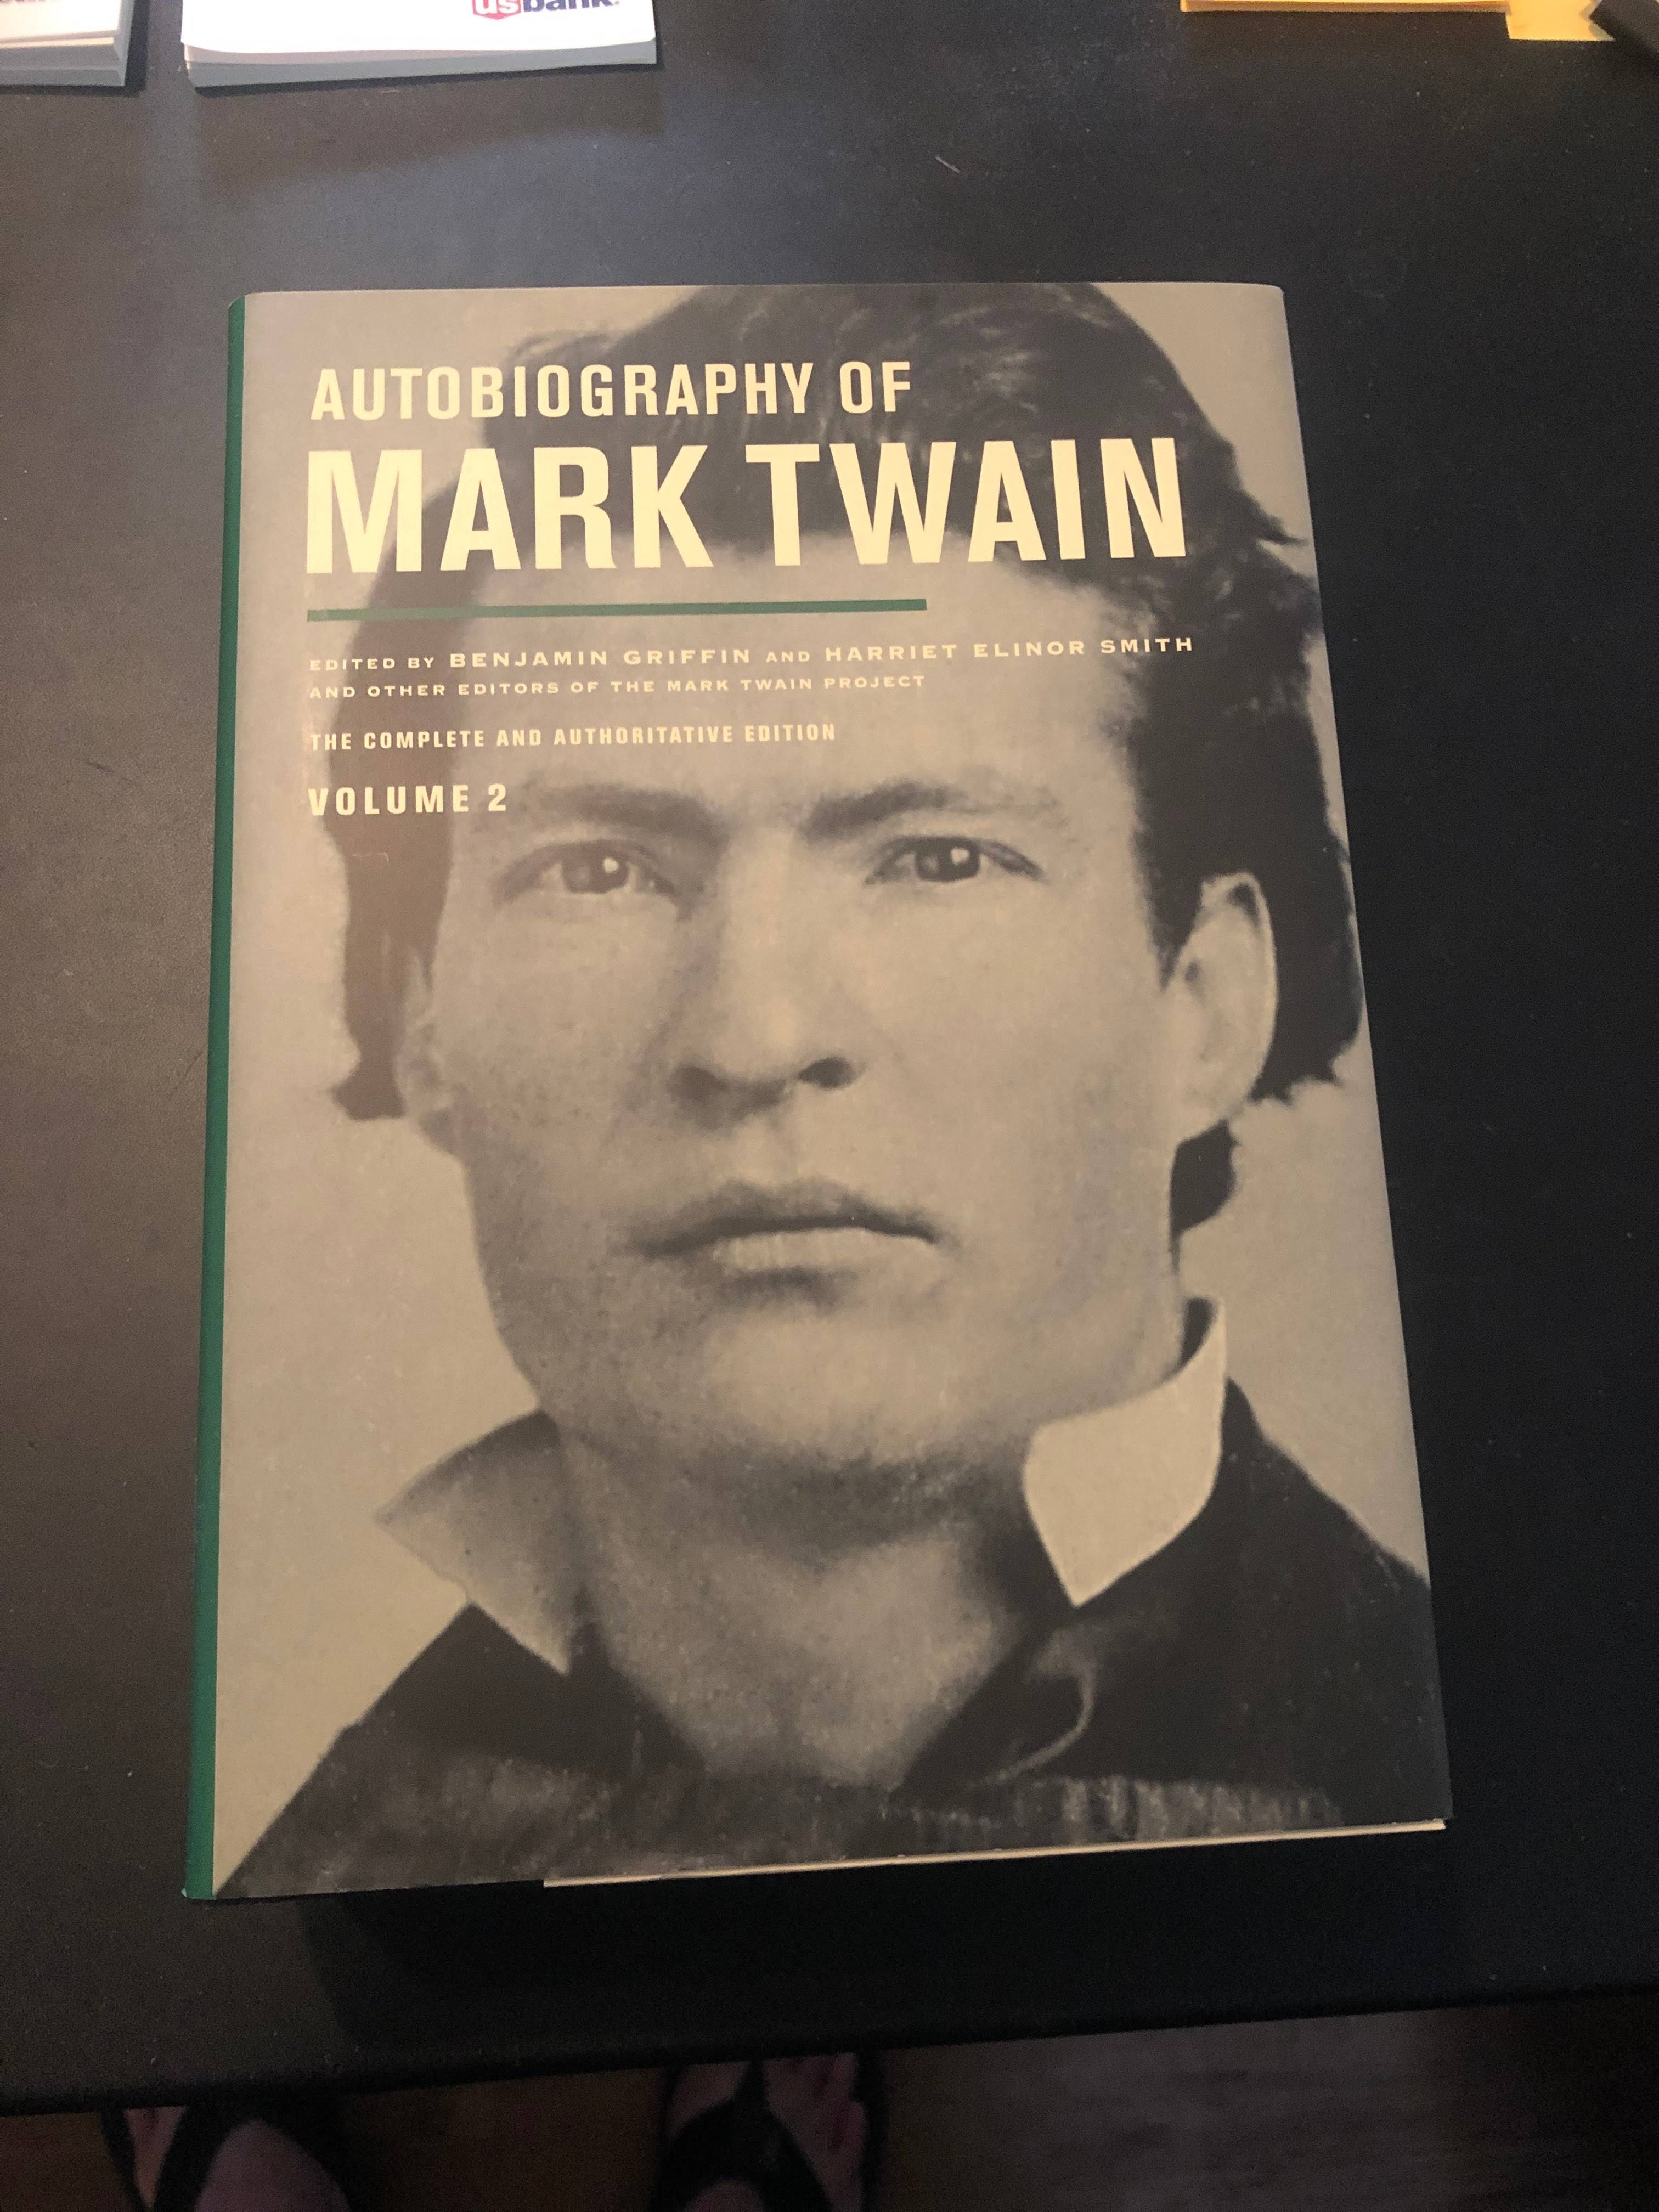 Mark Twain's Autobiography Volume 2: Complete and Authoritative Edition | Image